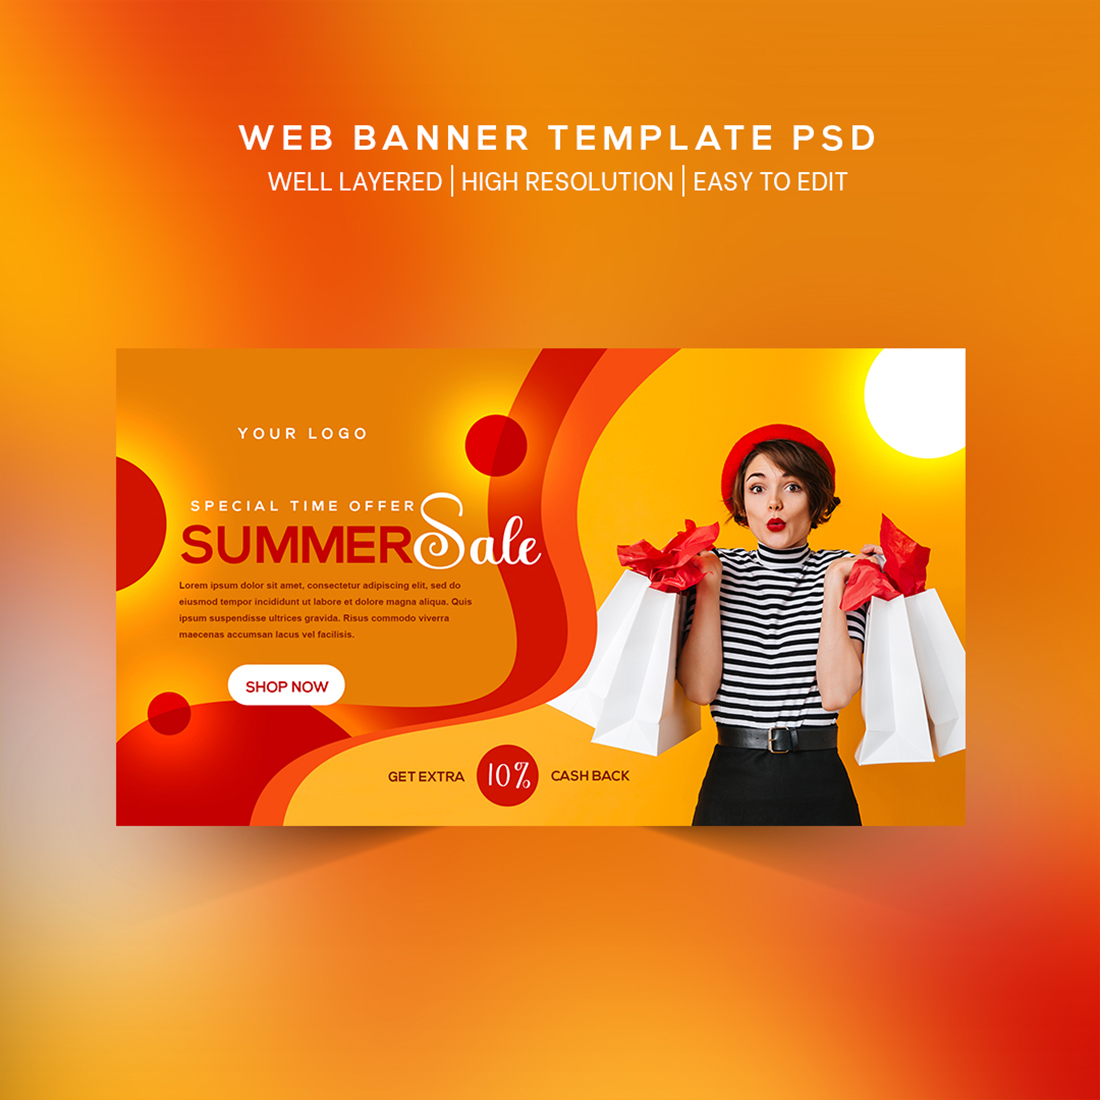 E-Commerce Sales Web Banner PSD Template cover image.